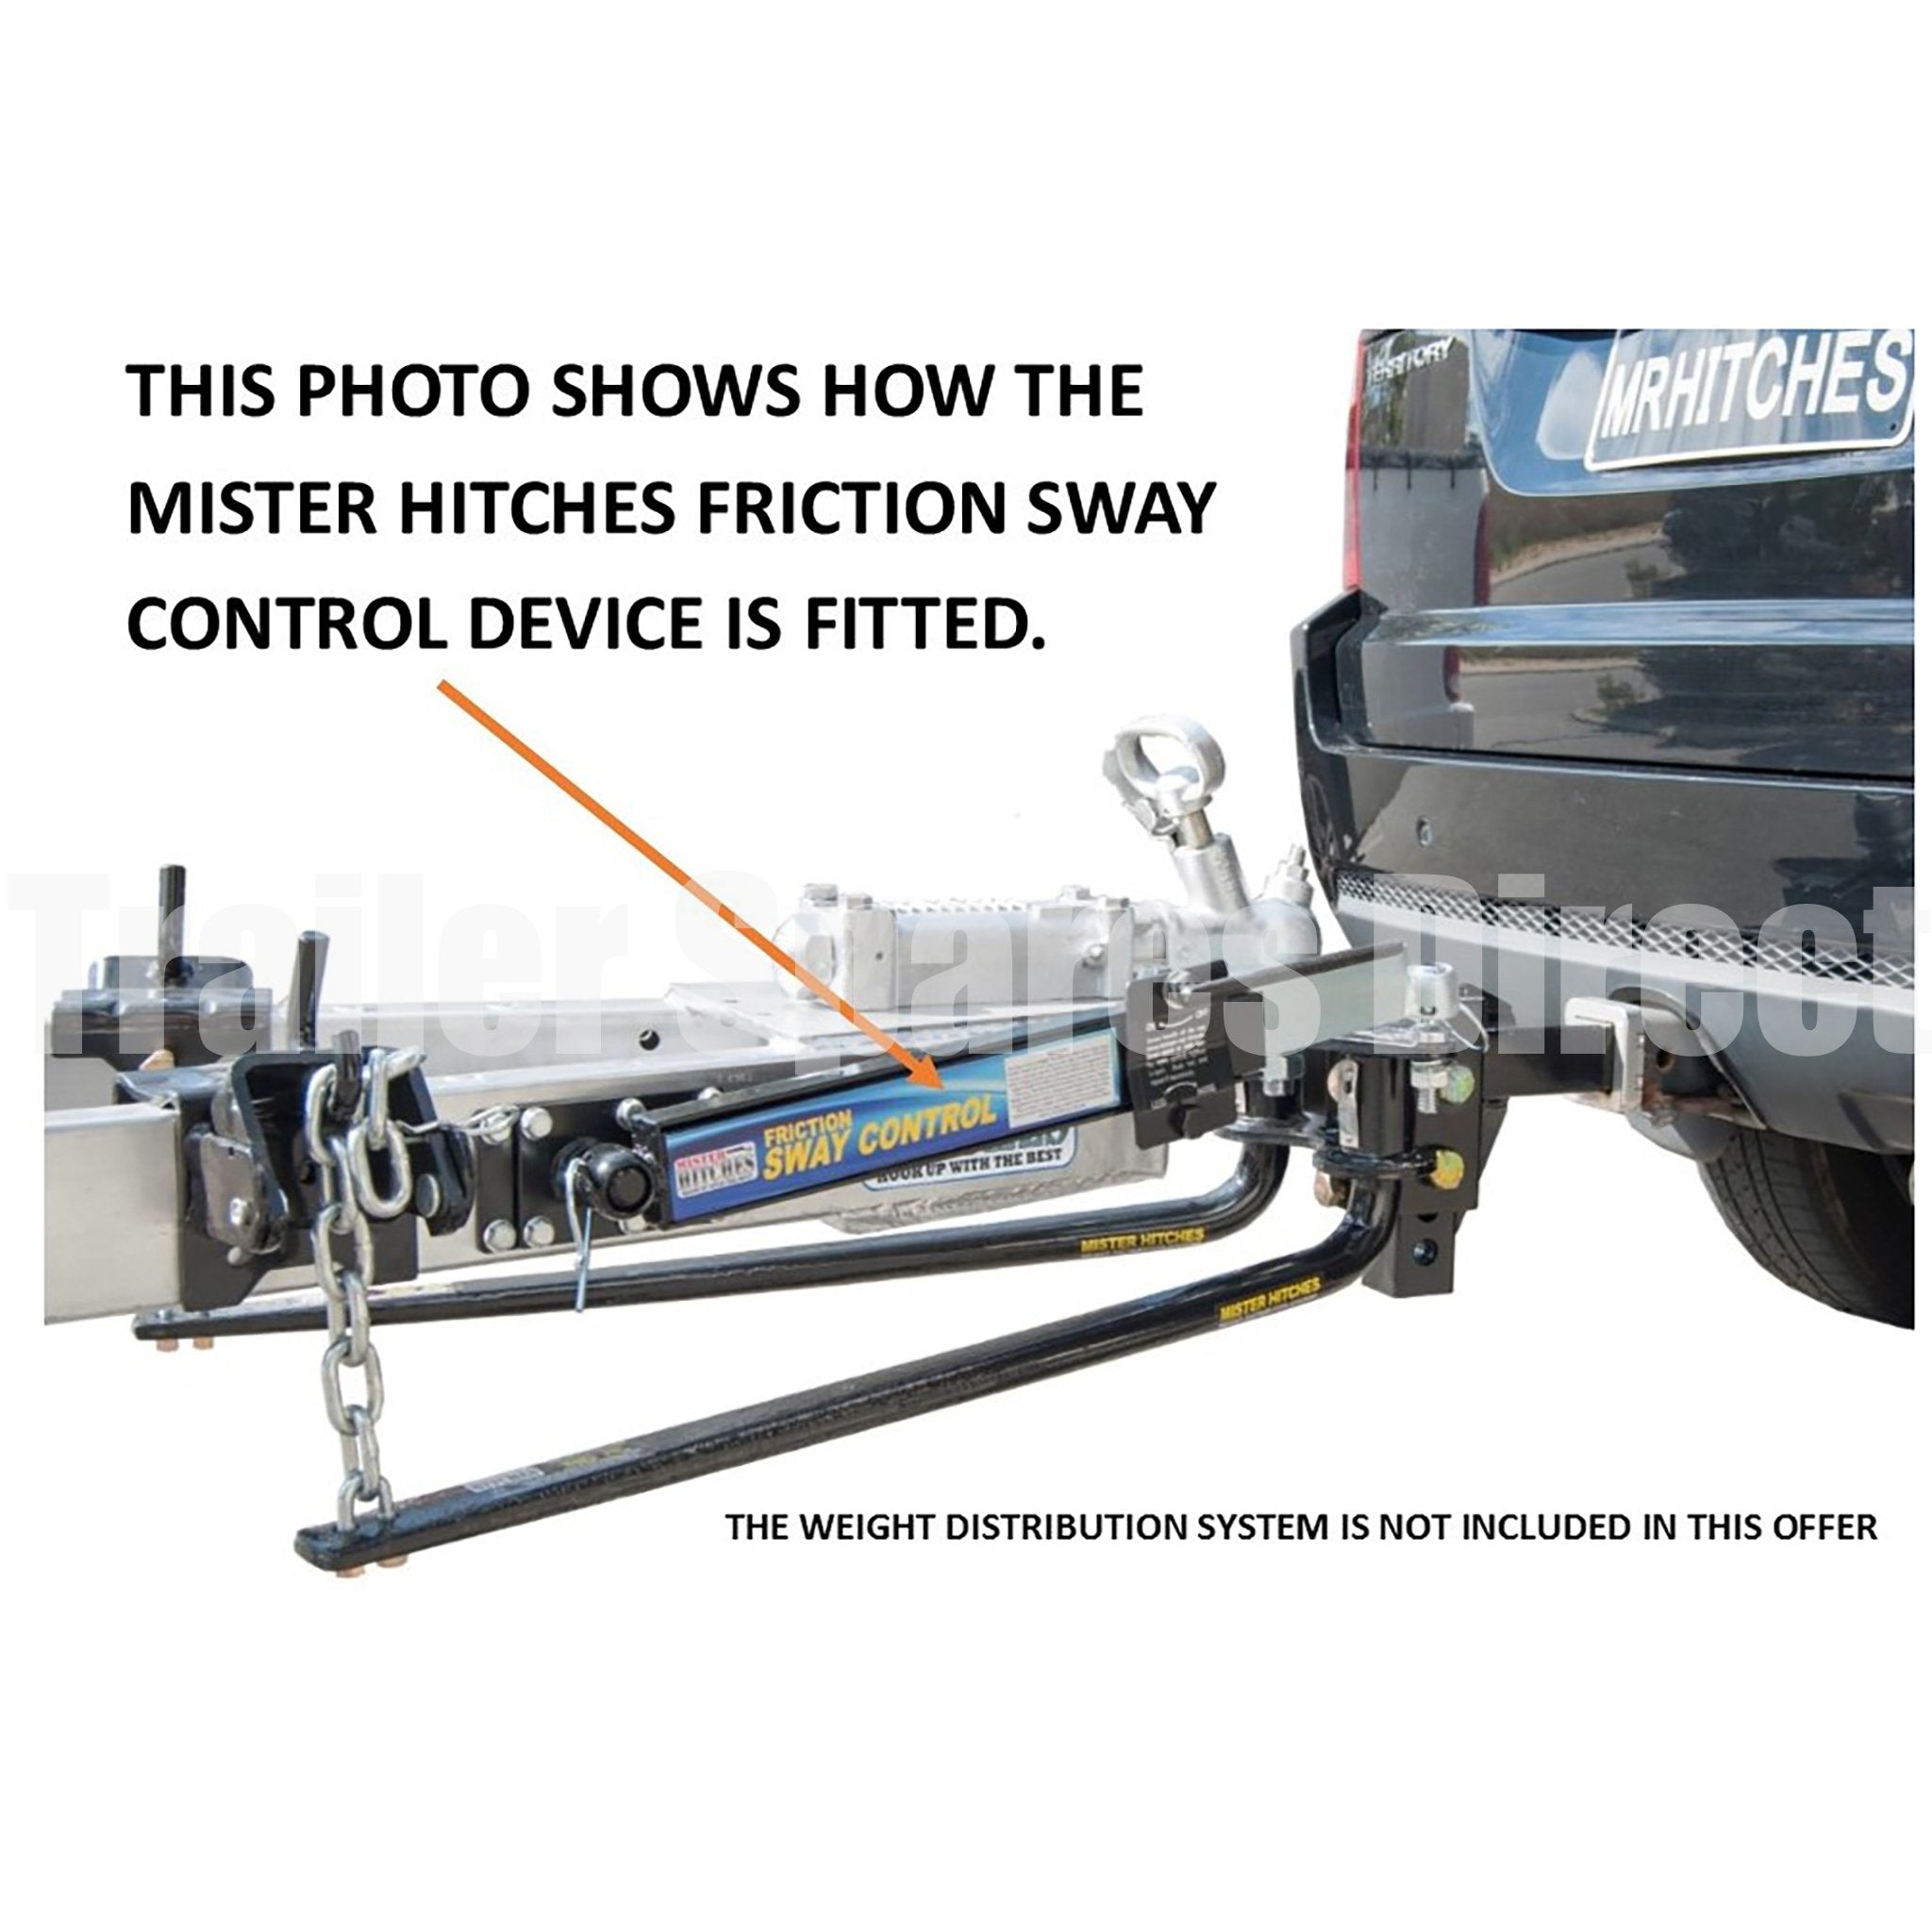 Mister Hitches friction sway control device